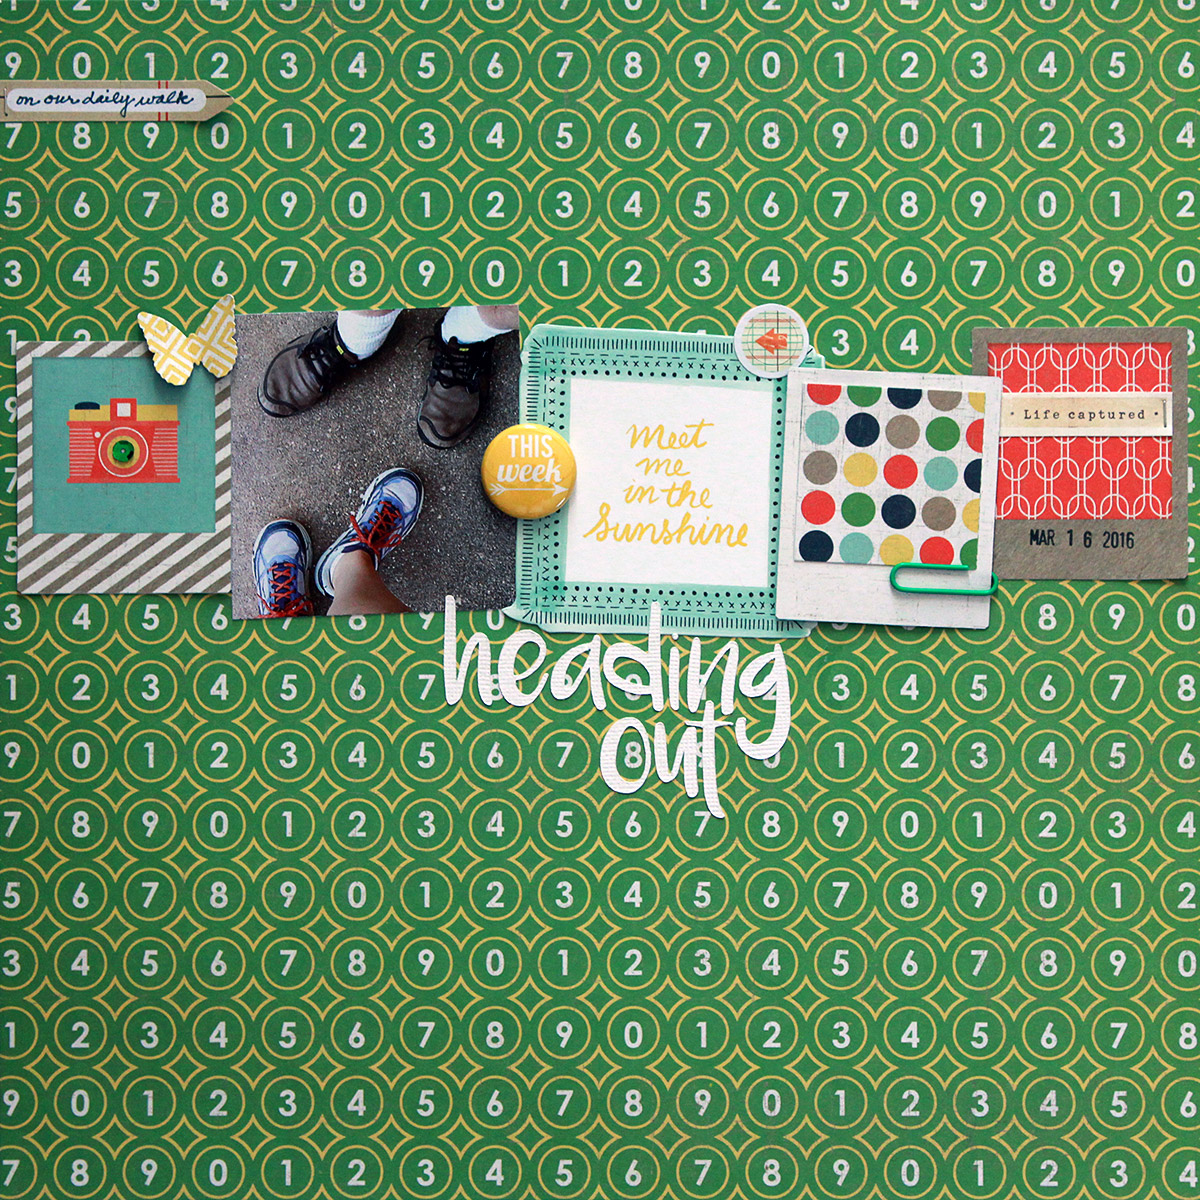 Heading out is a one-photo scrapbook page made with the We R Notable collection.